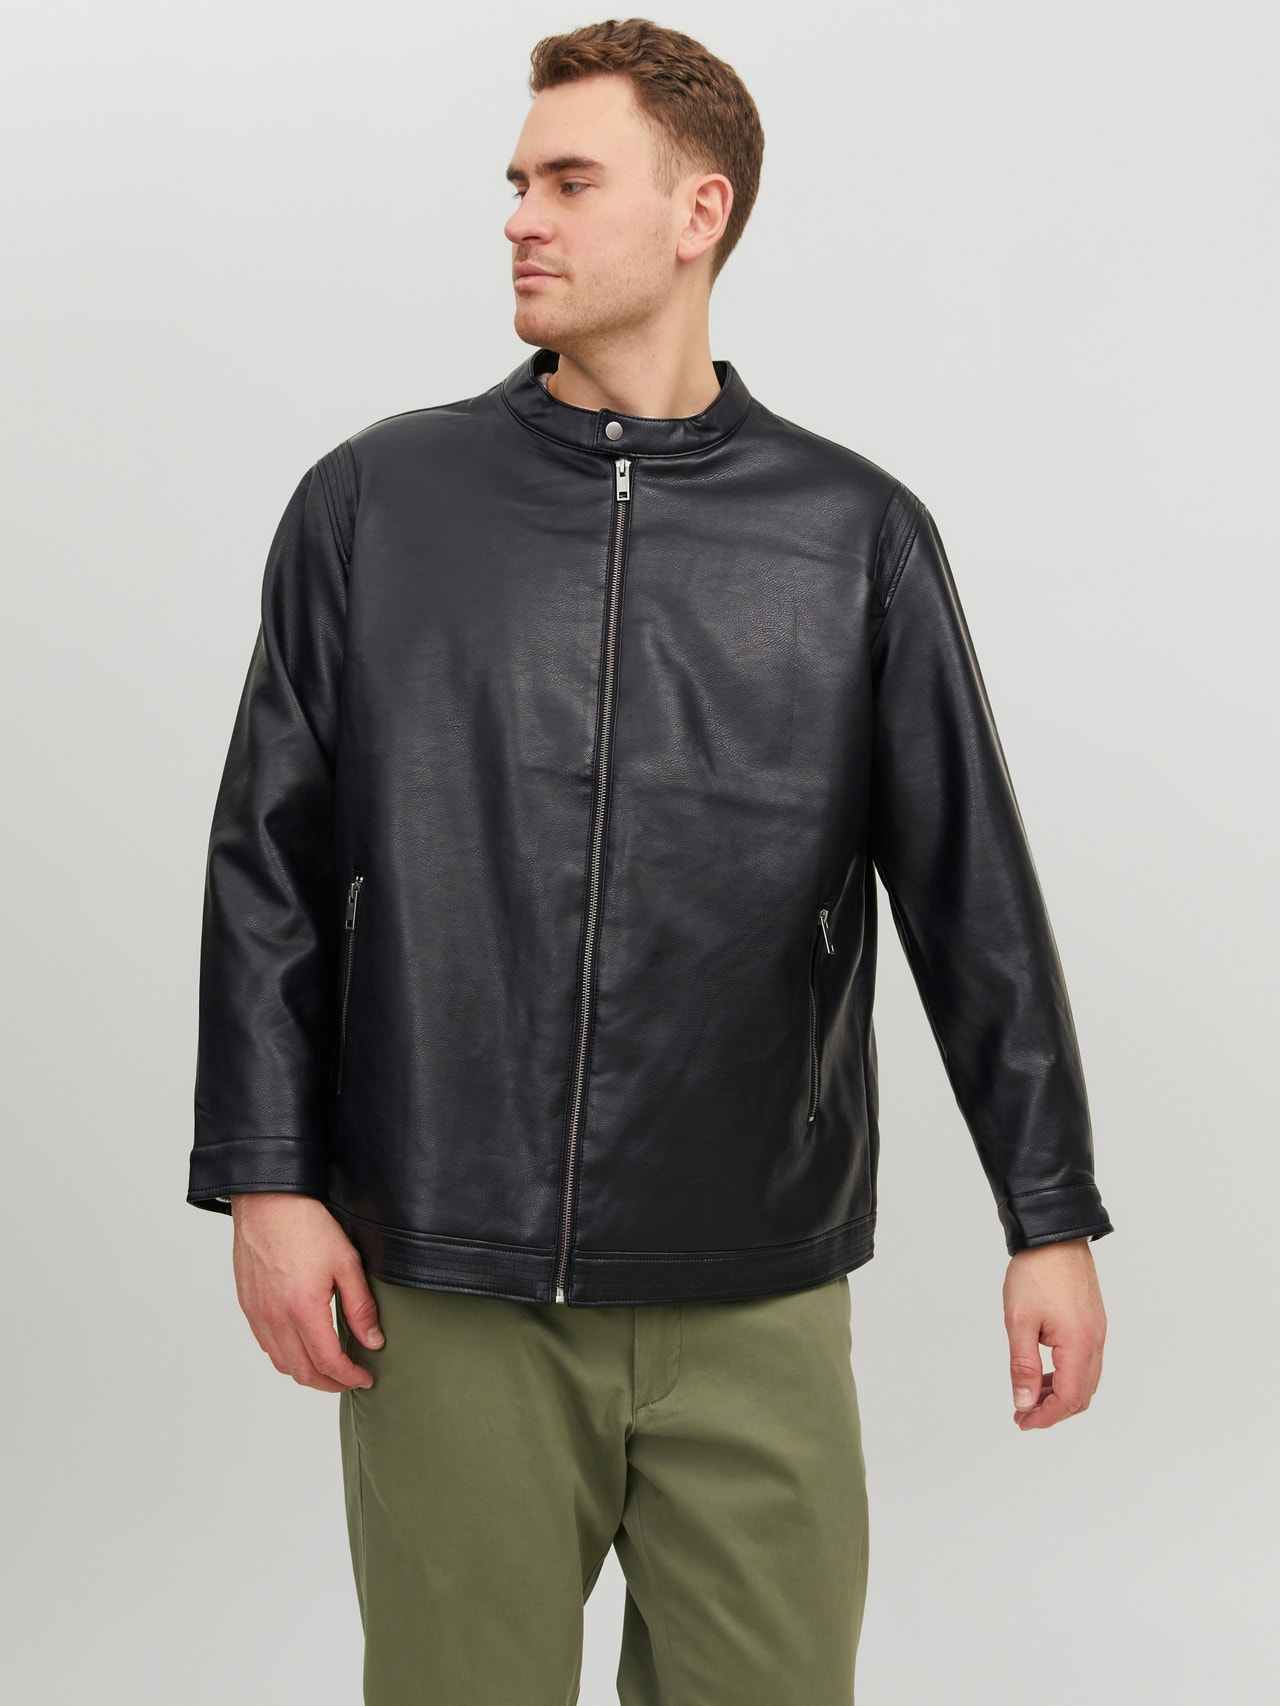 Plus Size Leather & Faux-Leather Jackets